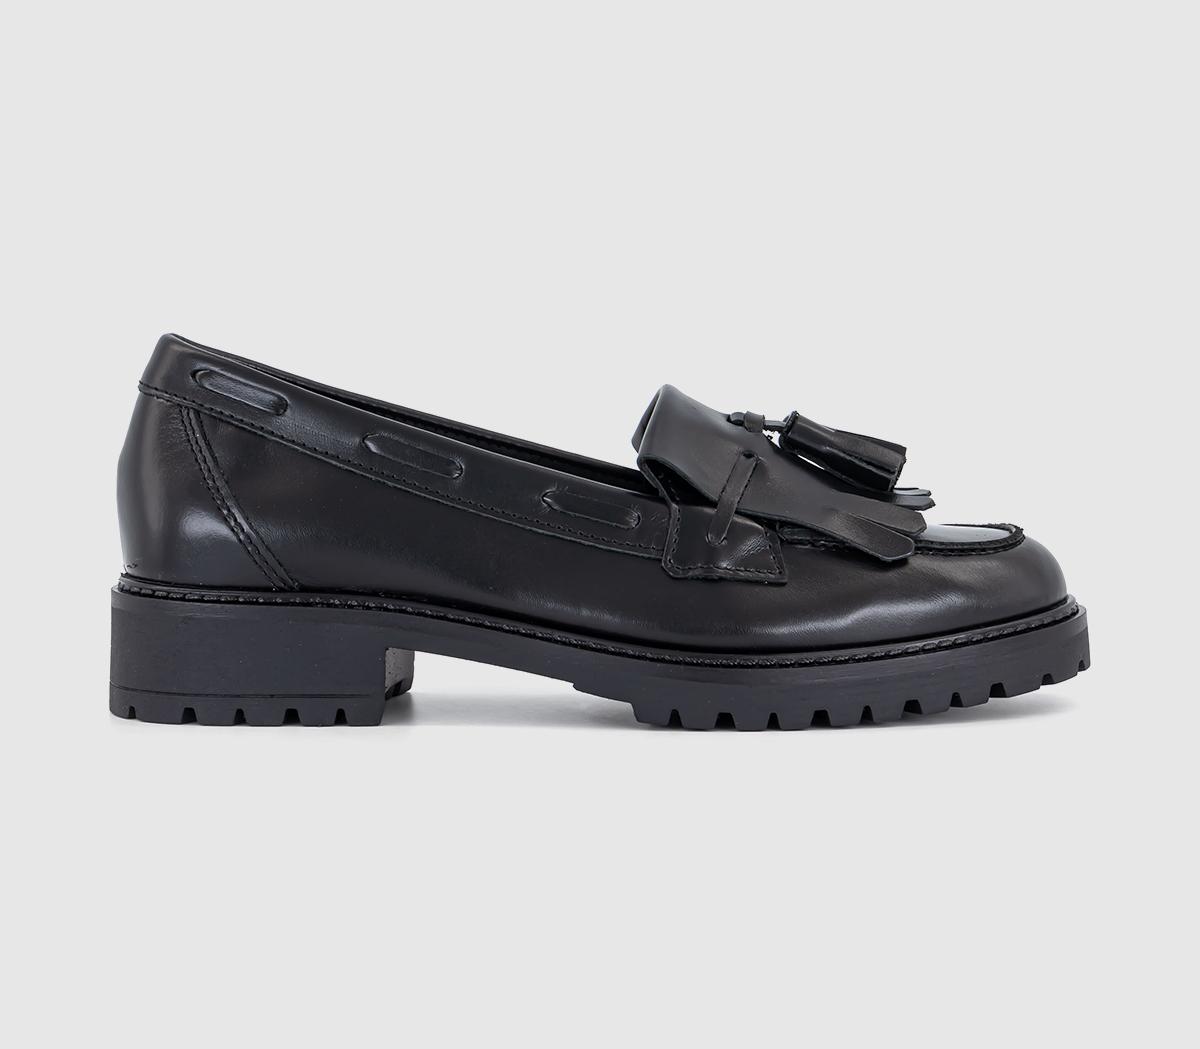 Frey Fringe Tassel Cleated Loafers Black Leather